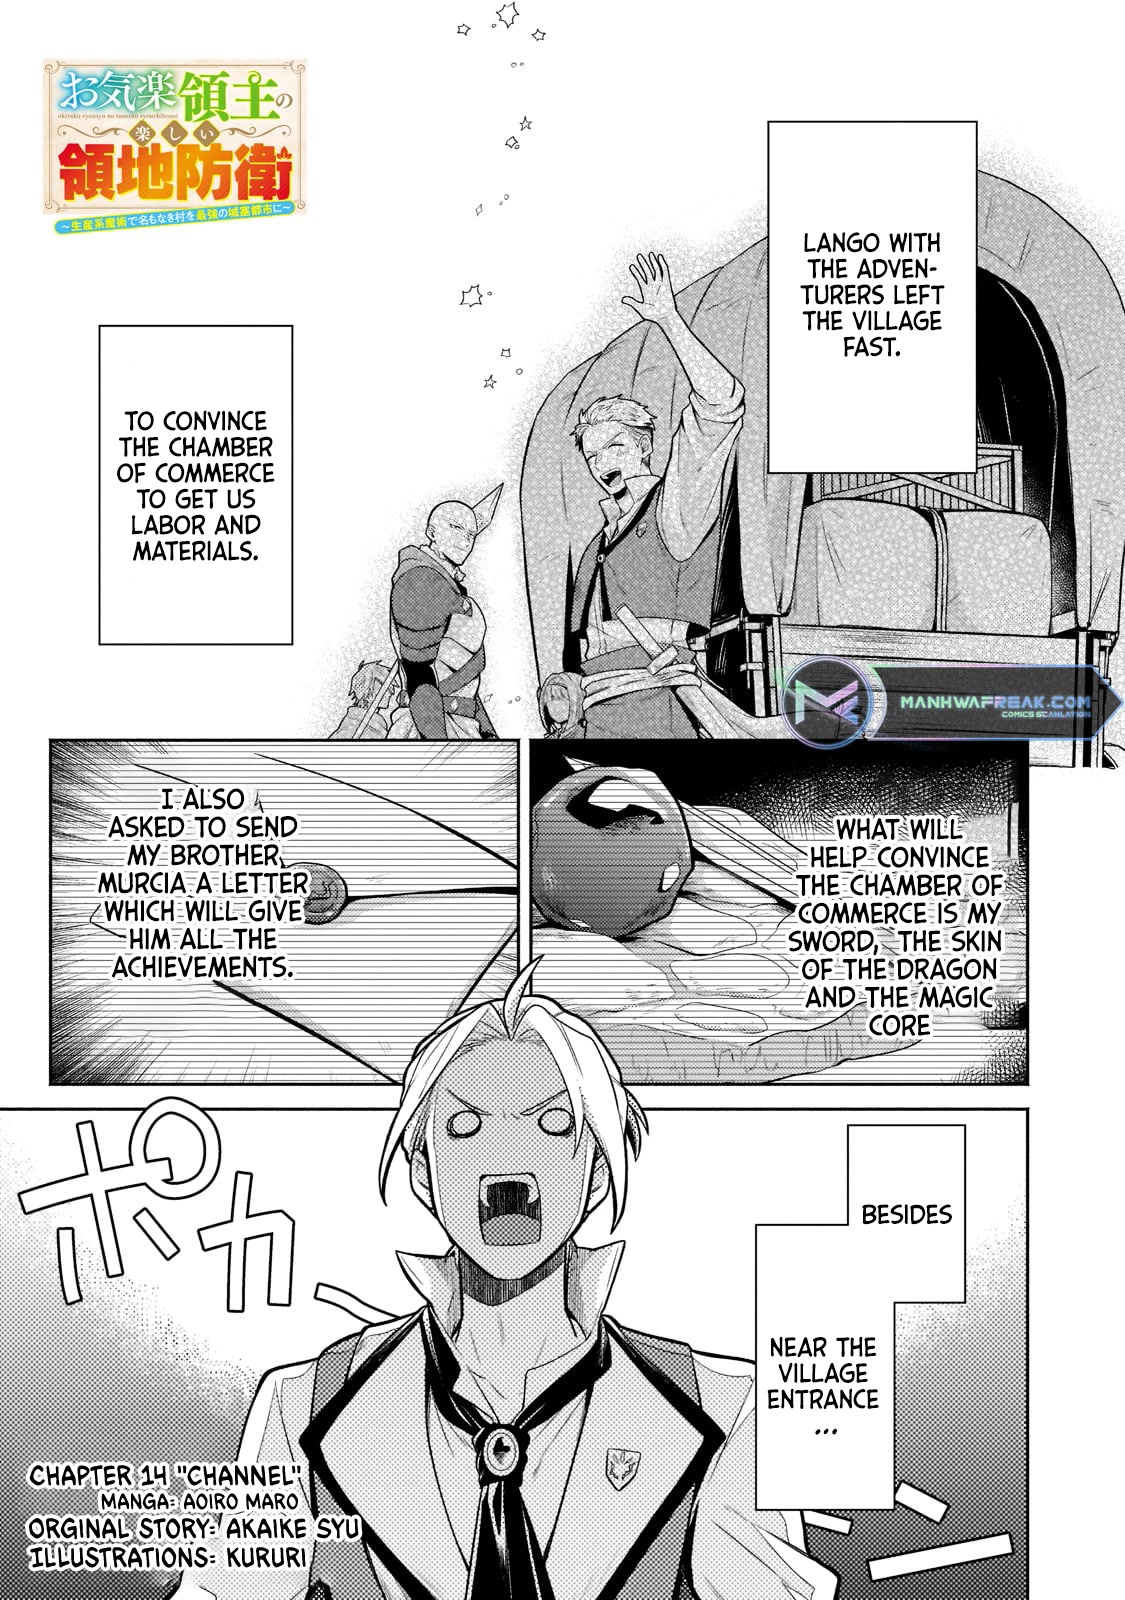 Fun Territory Defense By The Optimistic Lord Chapter 14 #1